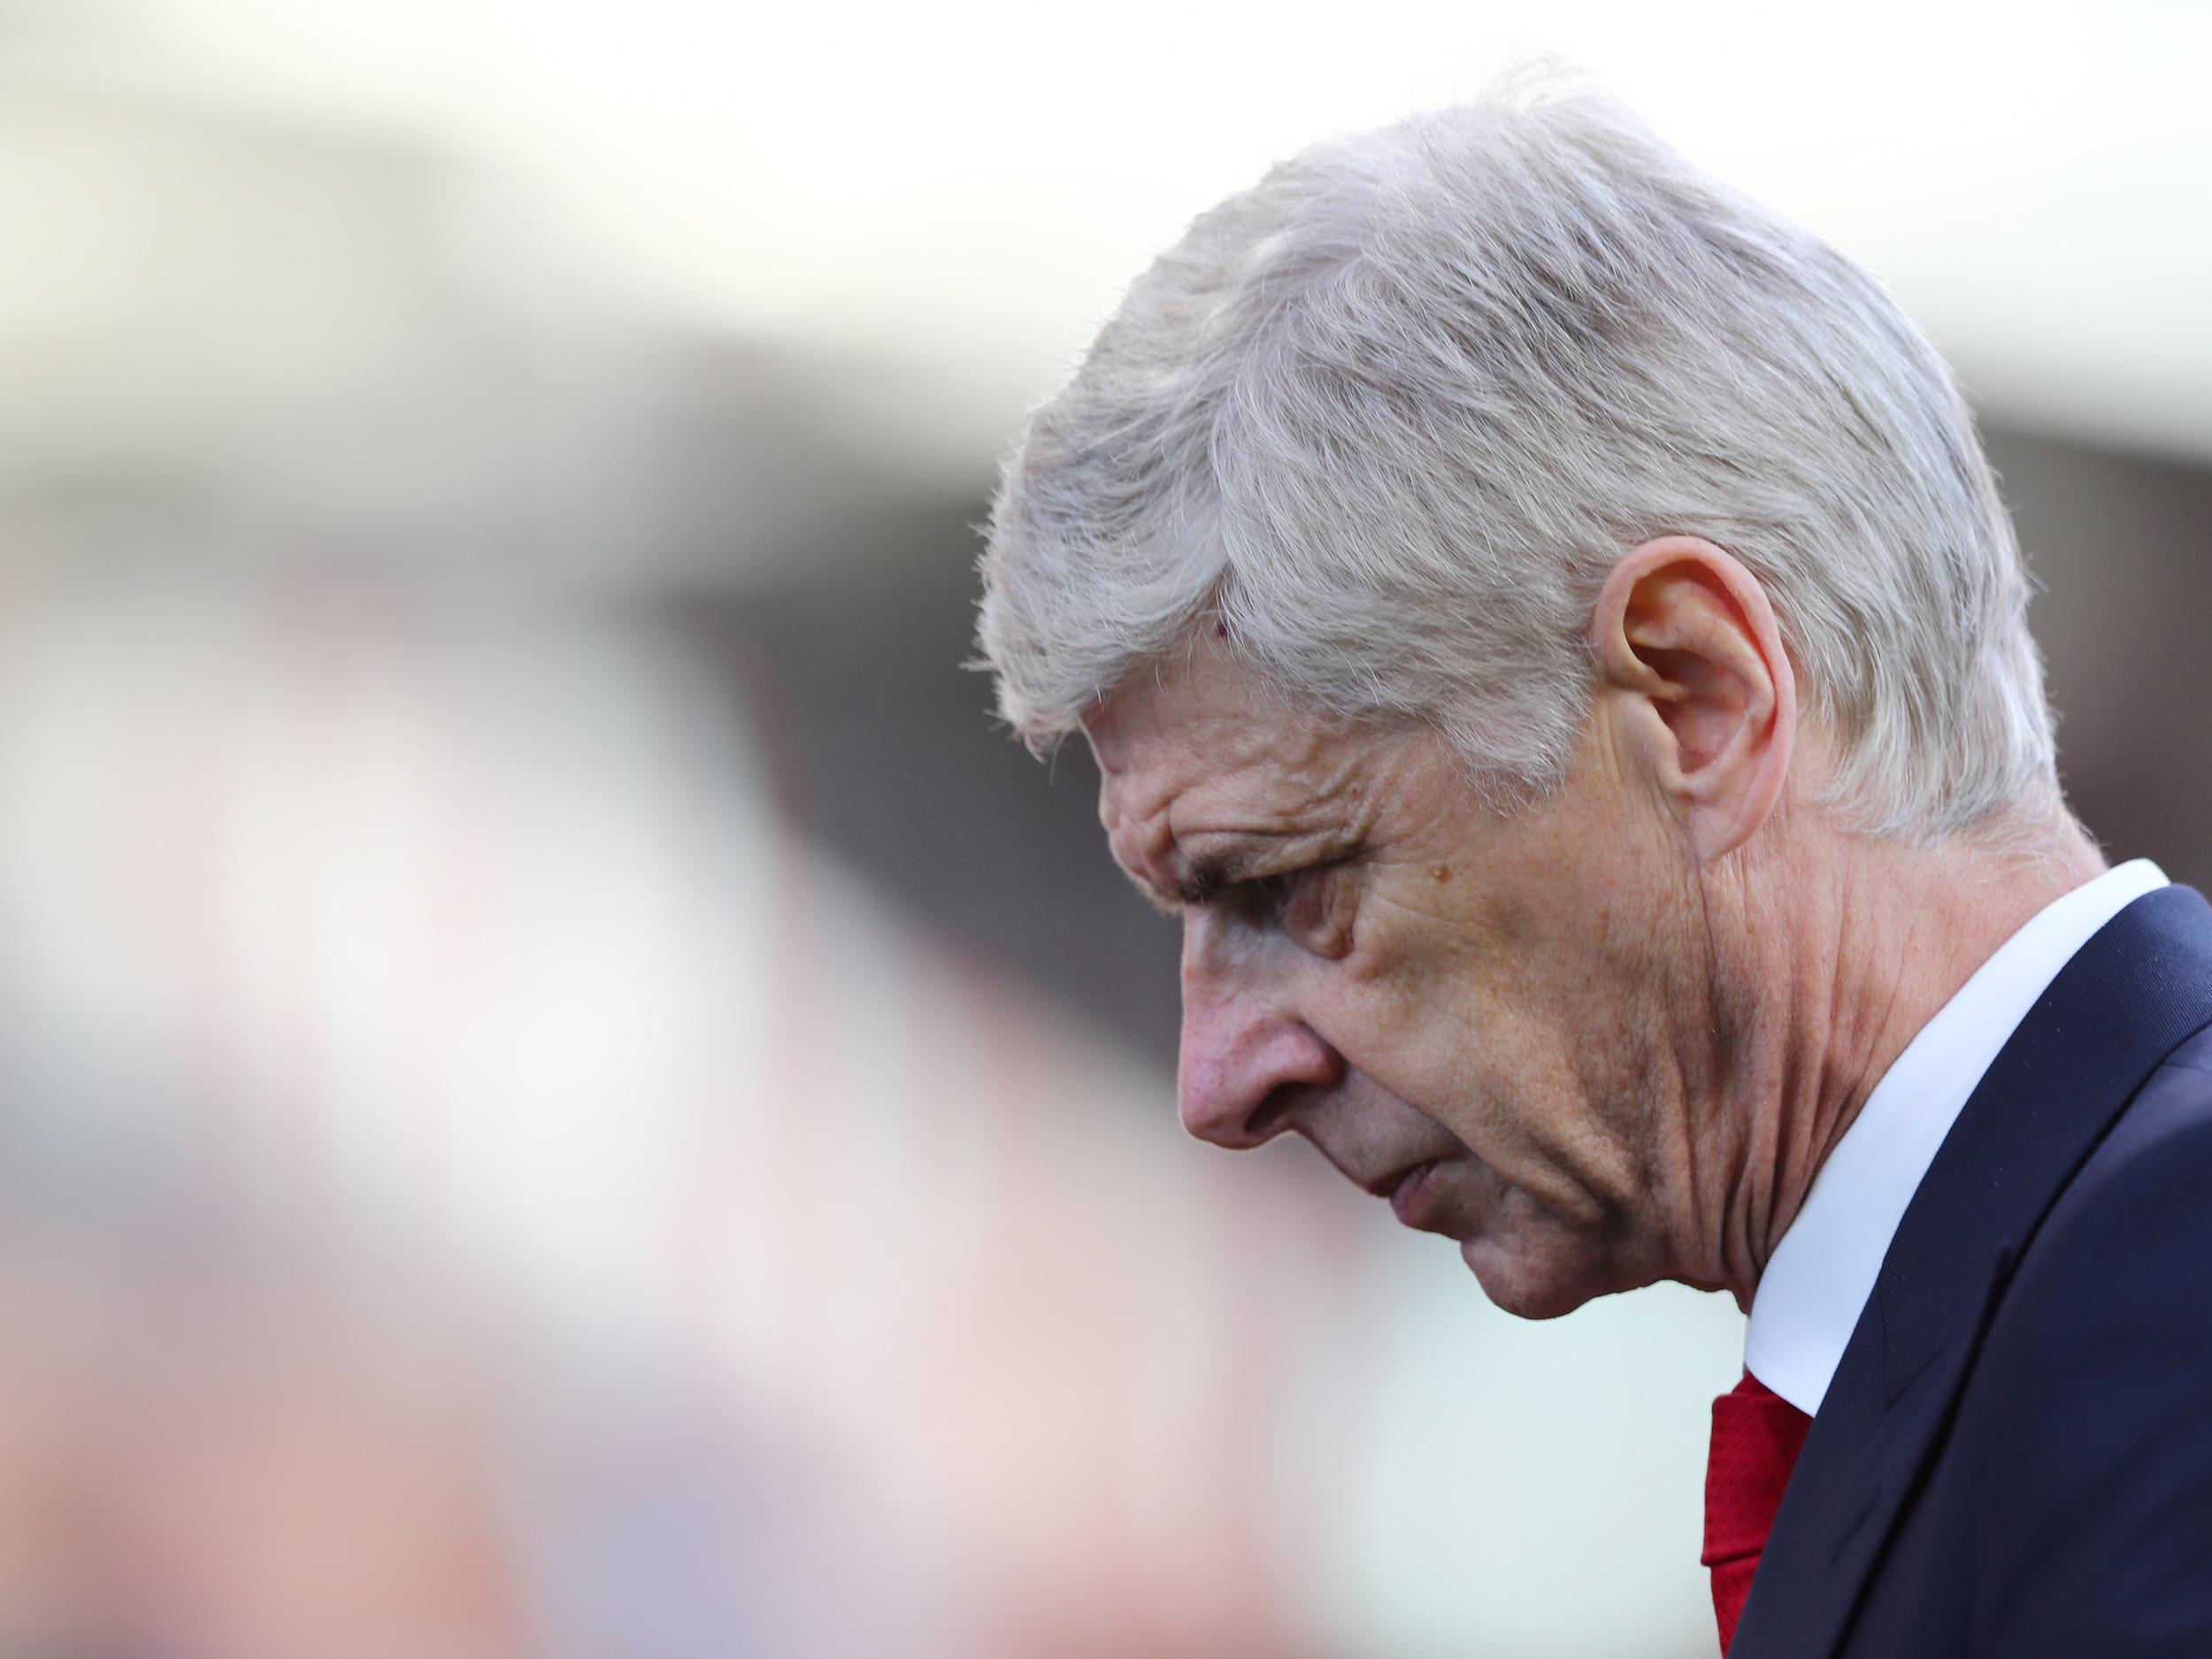 Wenger has something approaching a crisis on his hands